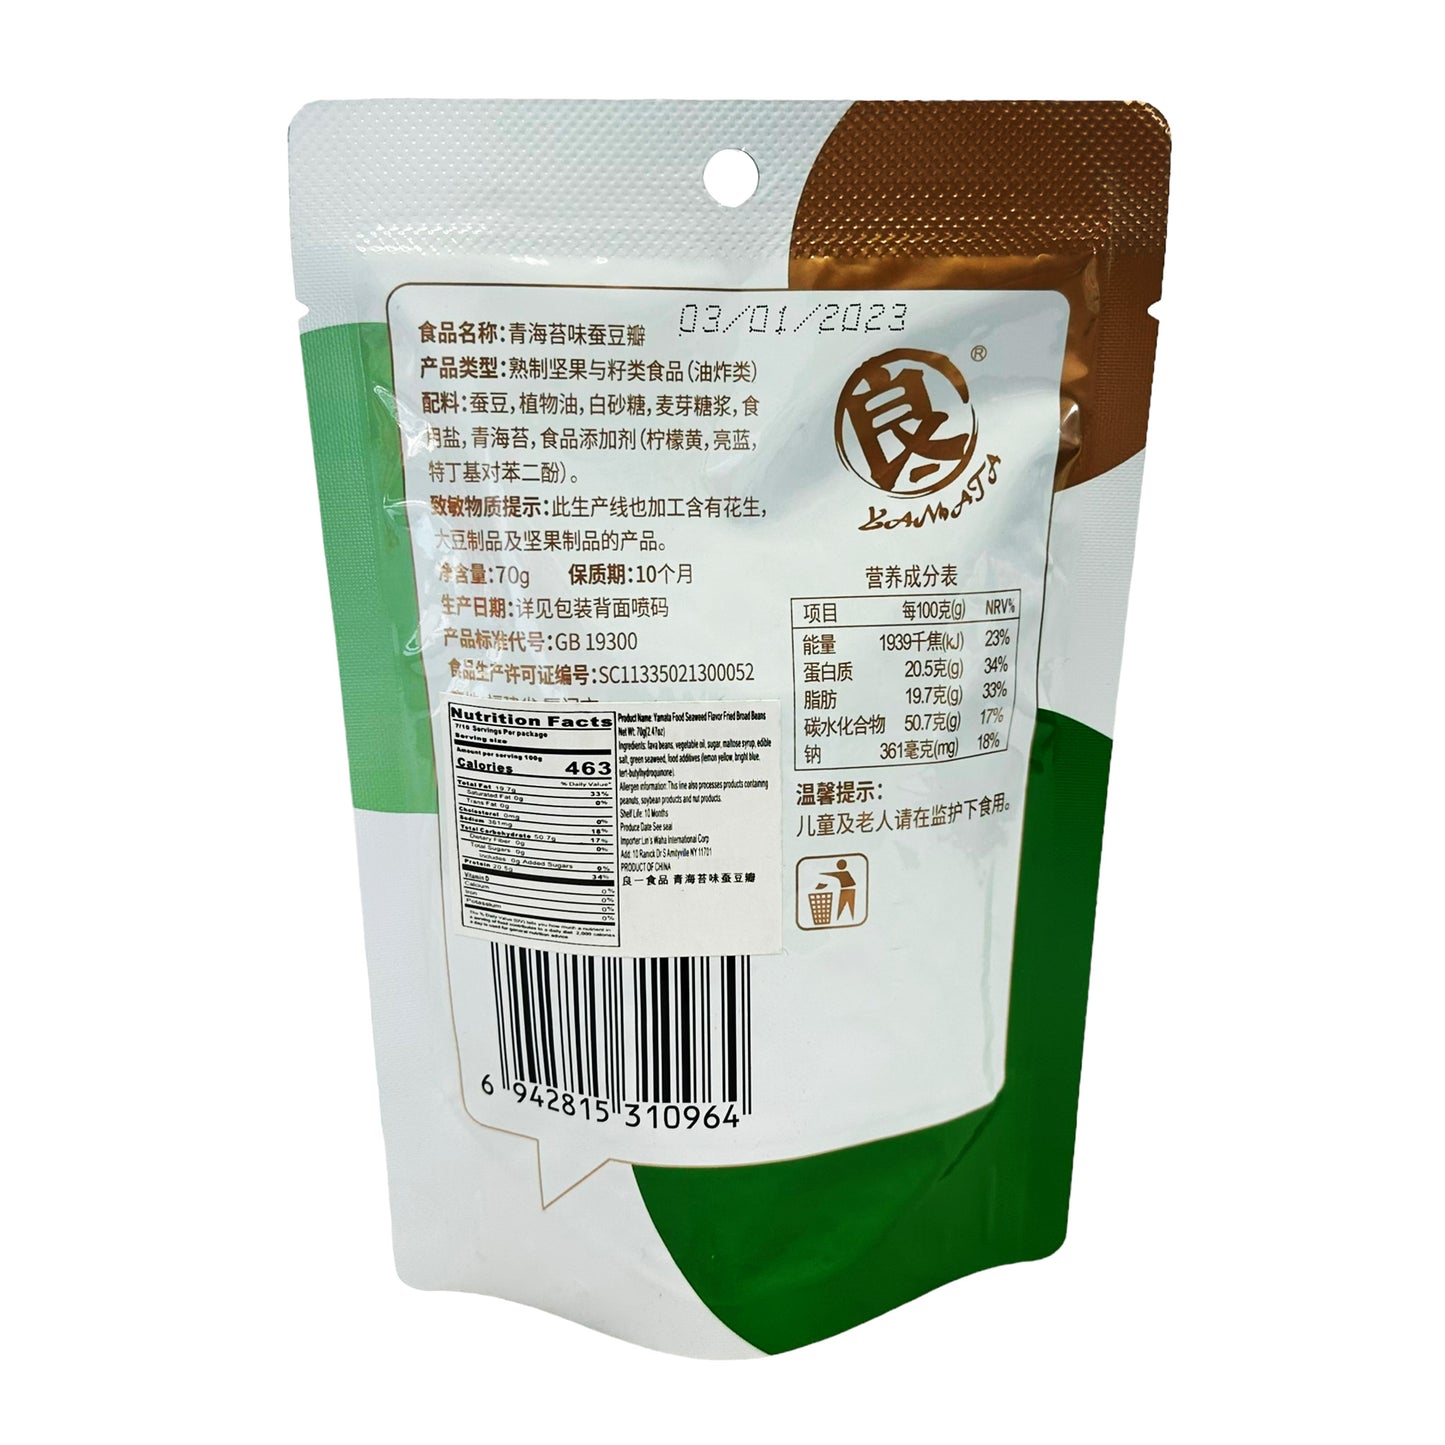 Back graphic image of Yamata Seaweed Flavor Fried Broad Beans 2.46oz (70g)